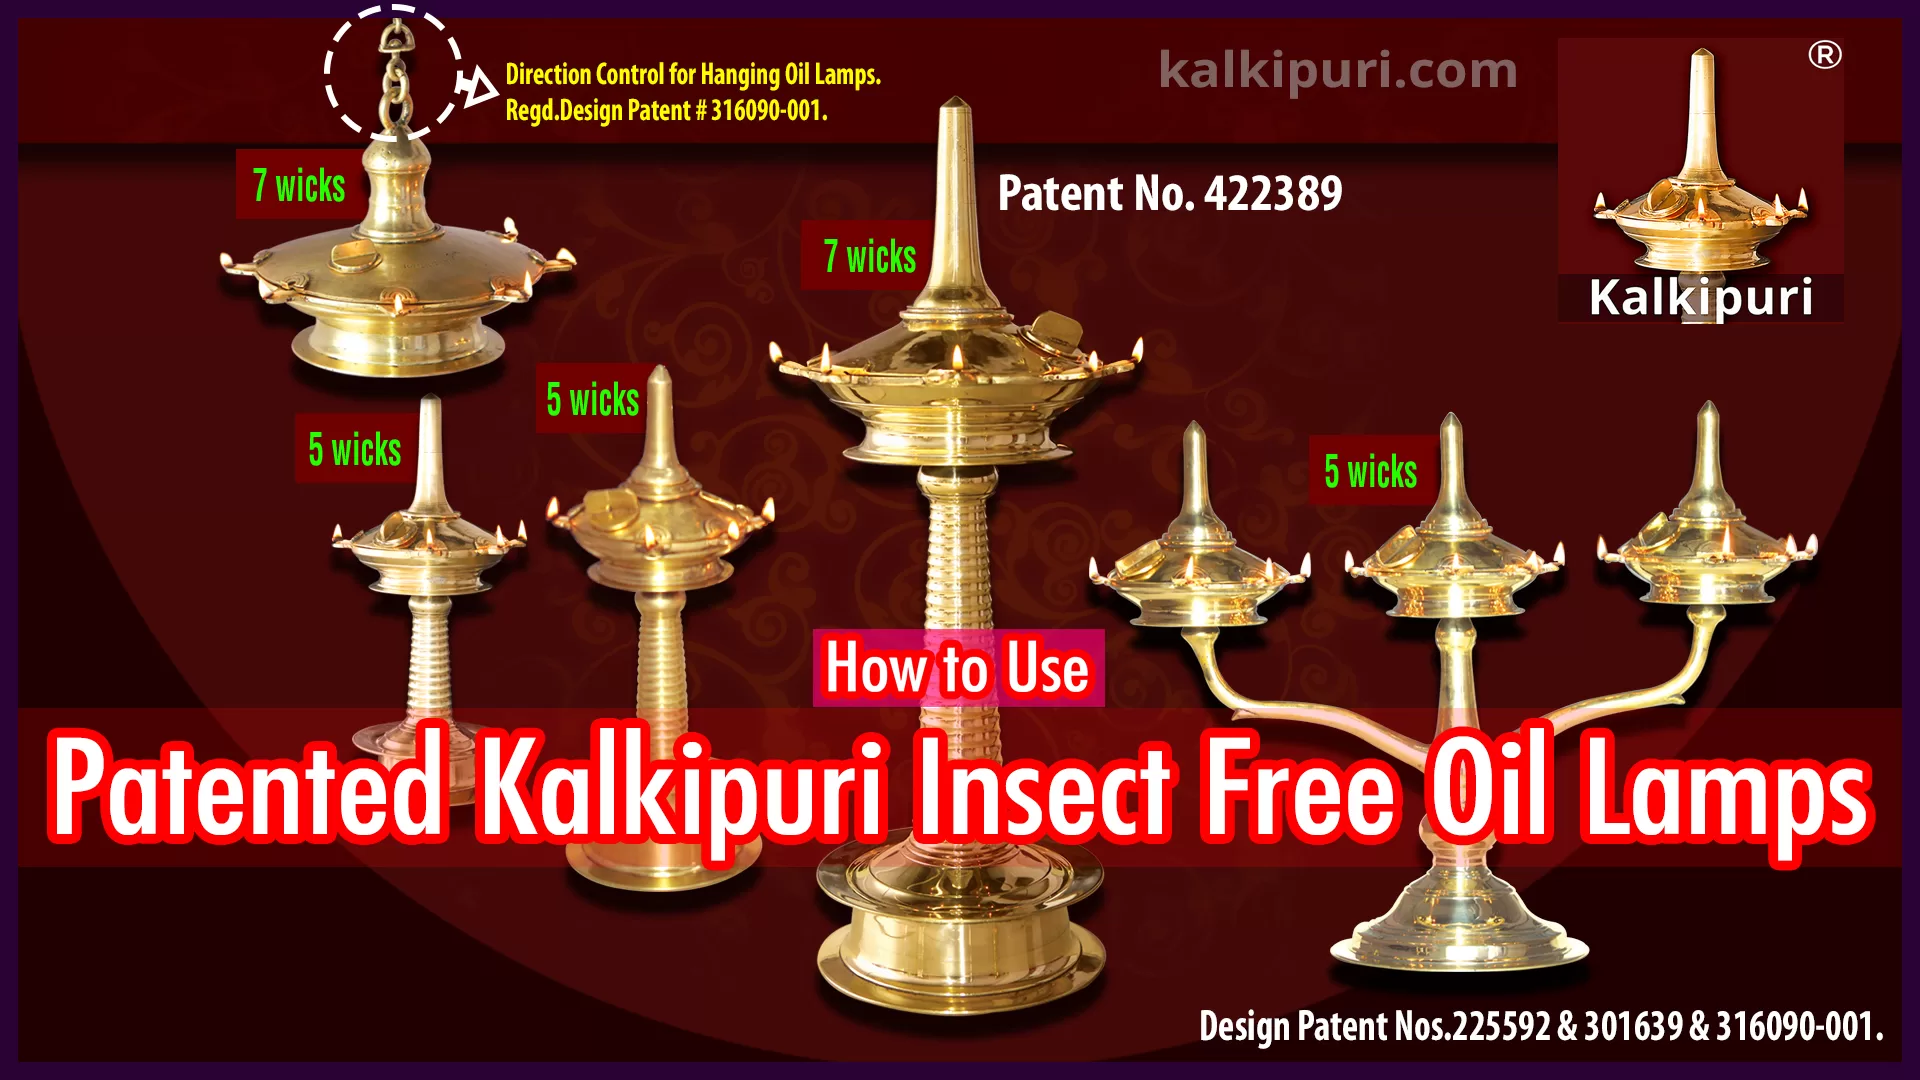 How to use Patented (No.422389) Kalkipuri Insect Free Oil Lamp-Part 1